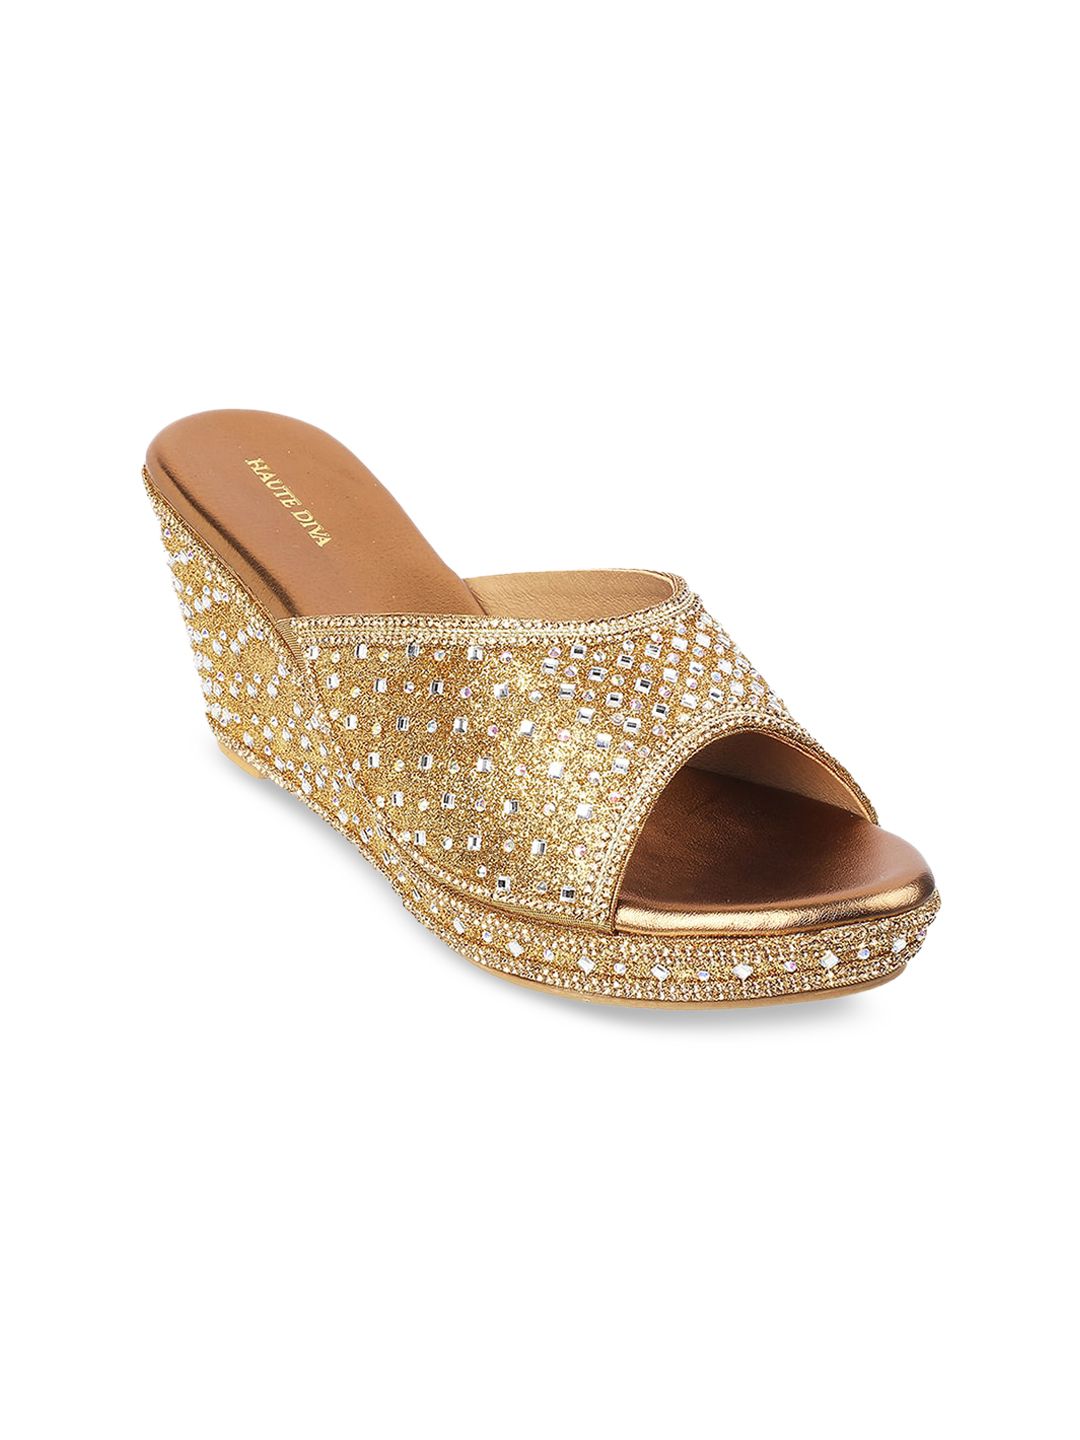 Mochi Gold-Toned Embellished Party Wedge Sandals Heels Price in India